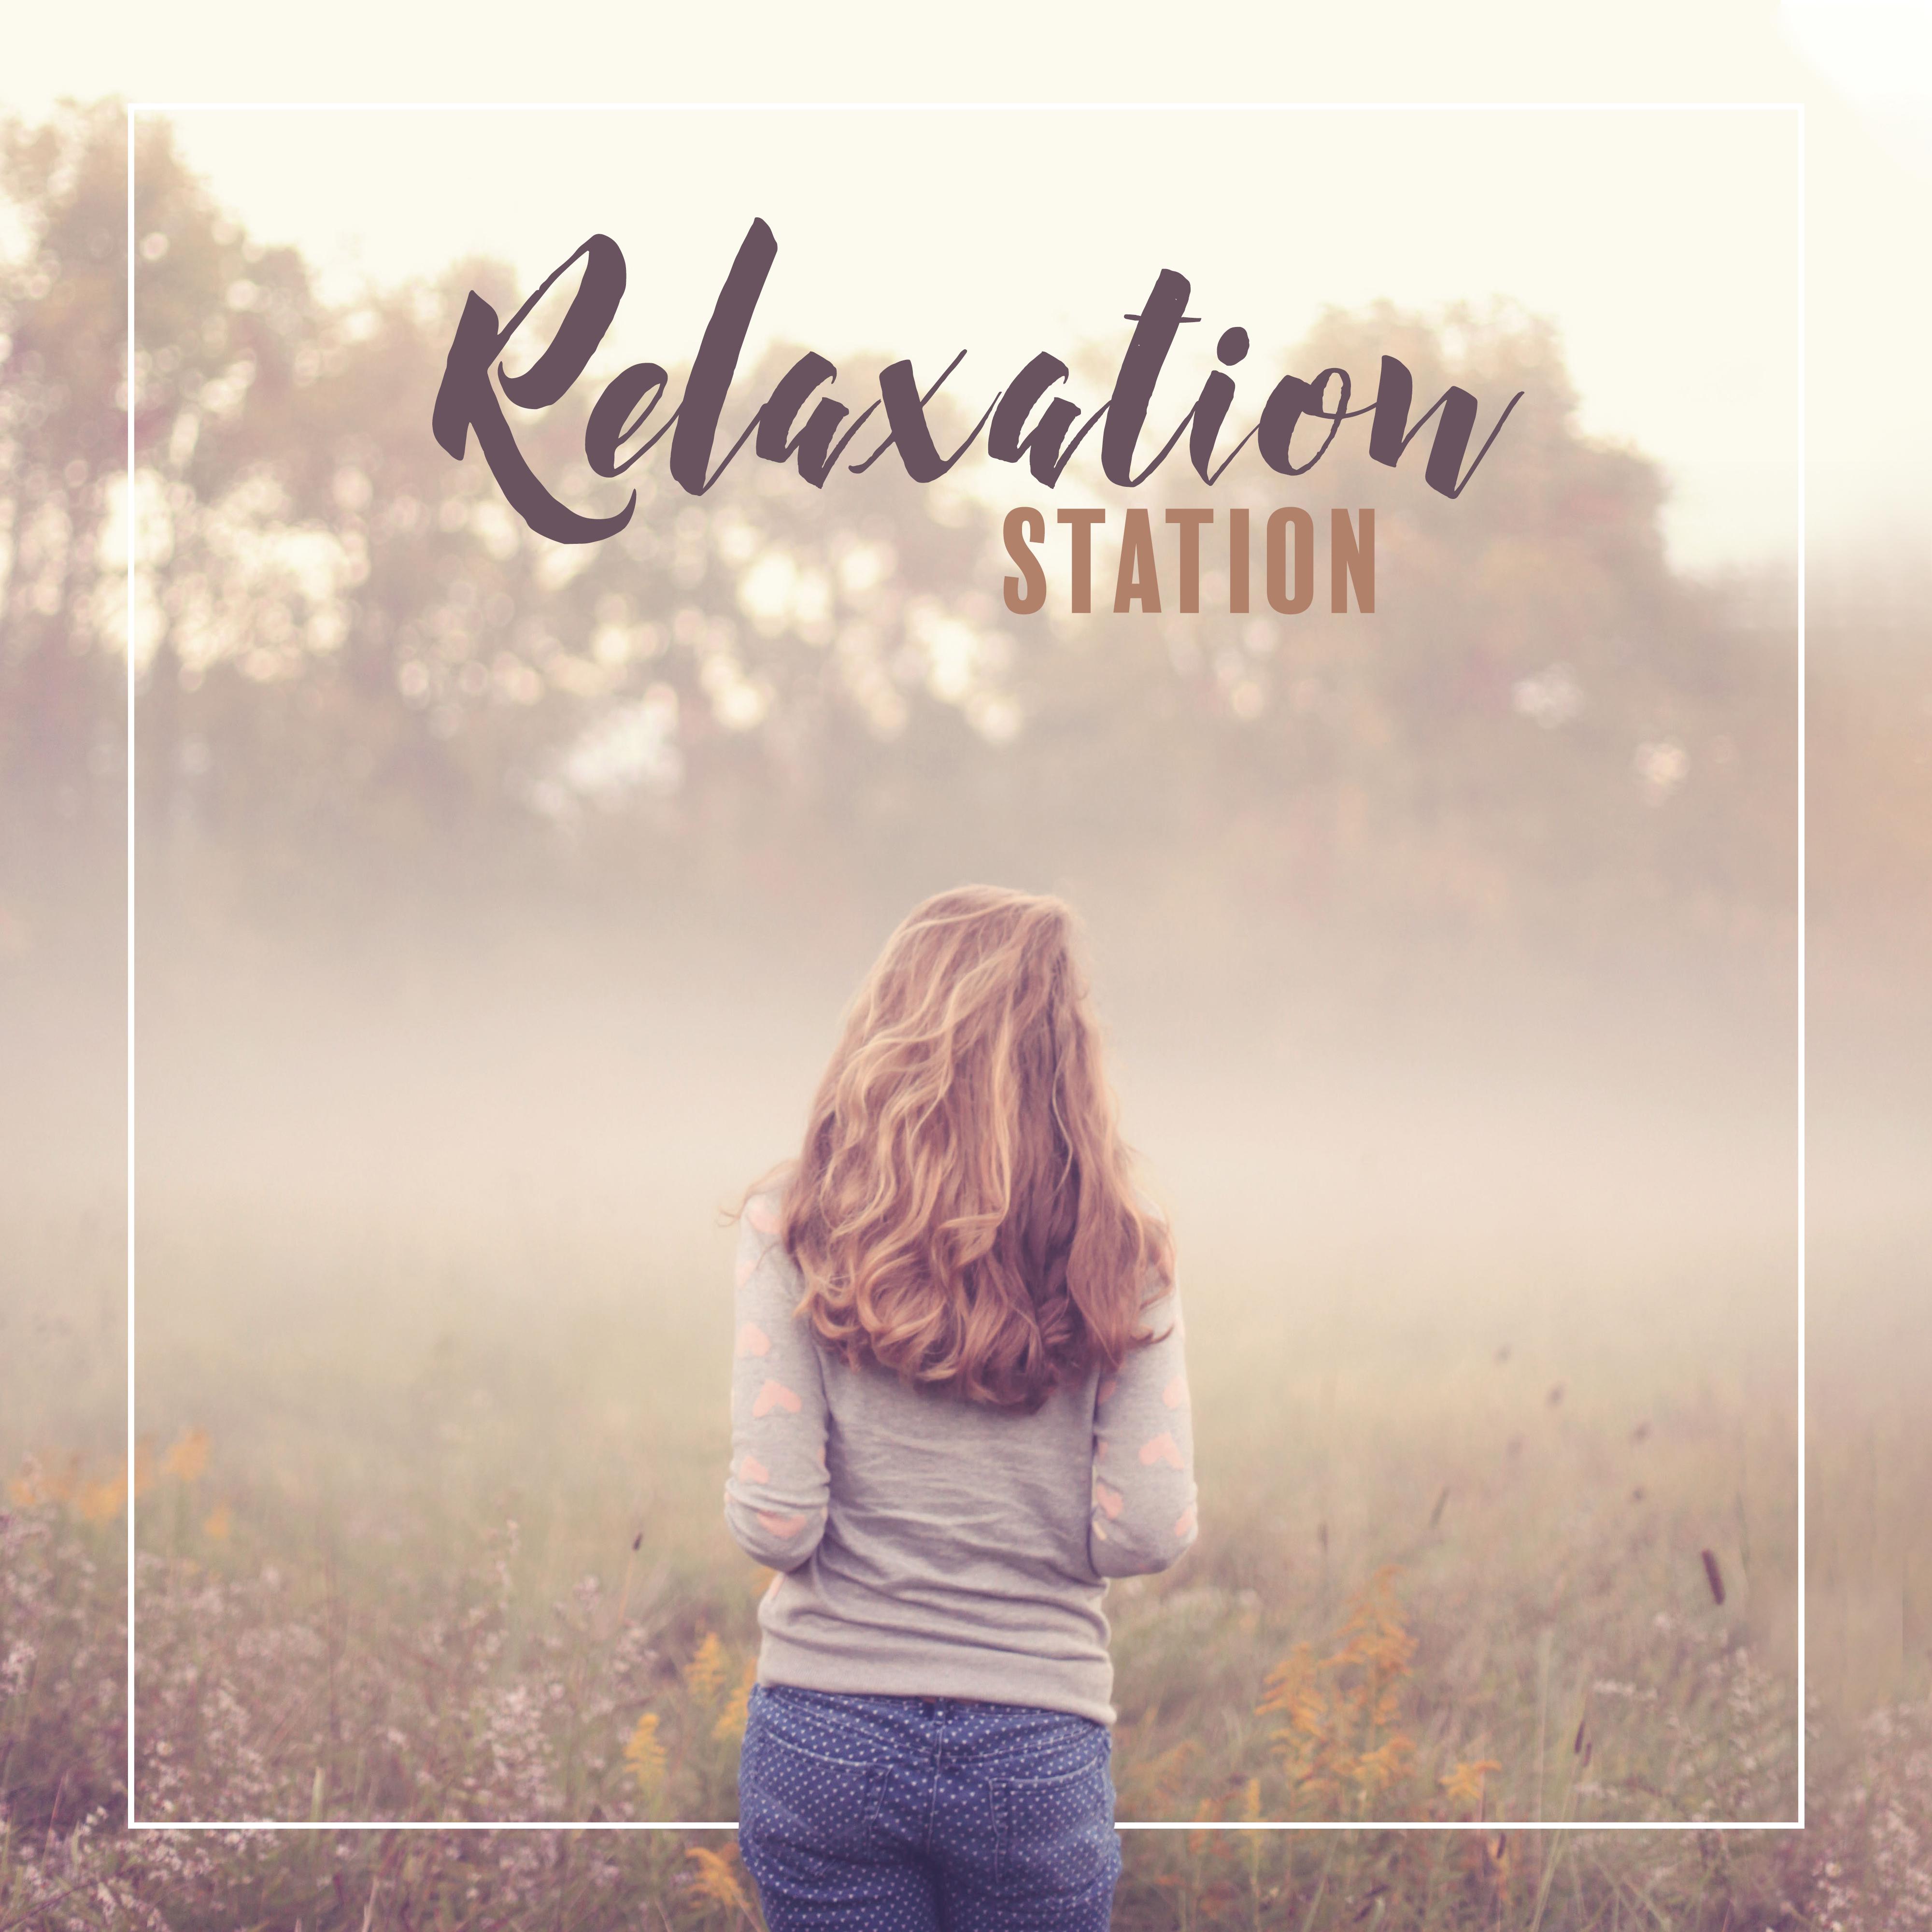 Relaxation Station  Relaxing Music Threrapy, Rest, Deep Meditation, Relaxation, Zen Serenity, Fresh Music to Calm Down